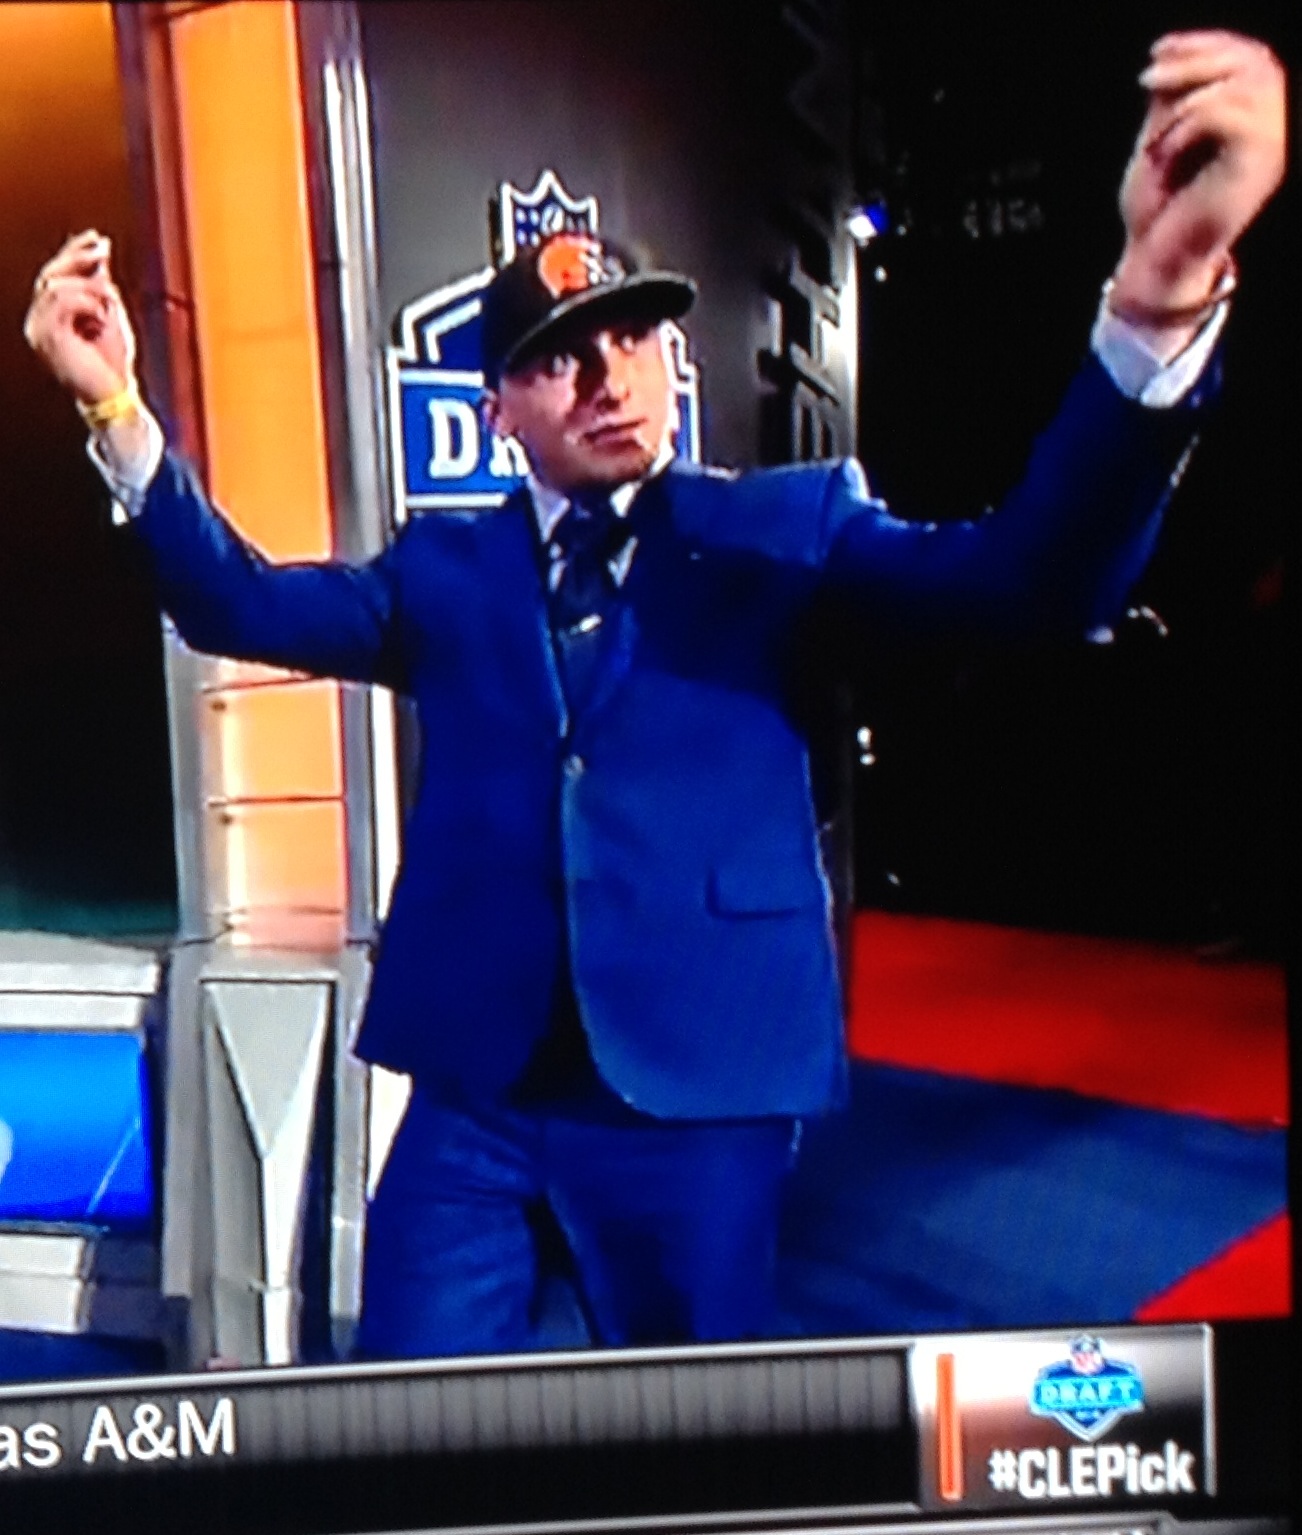 Johnny Manziel Money Sign On Stage at NFL Draft